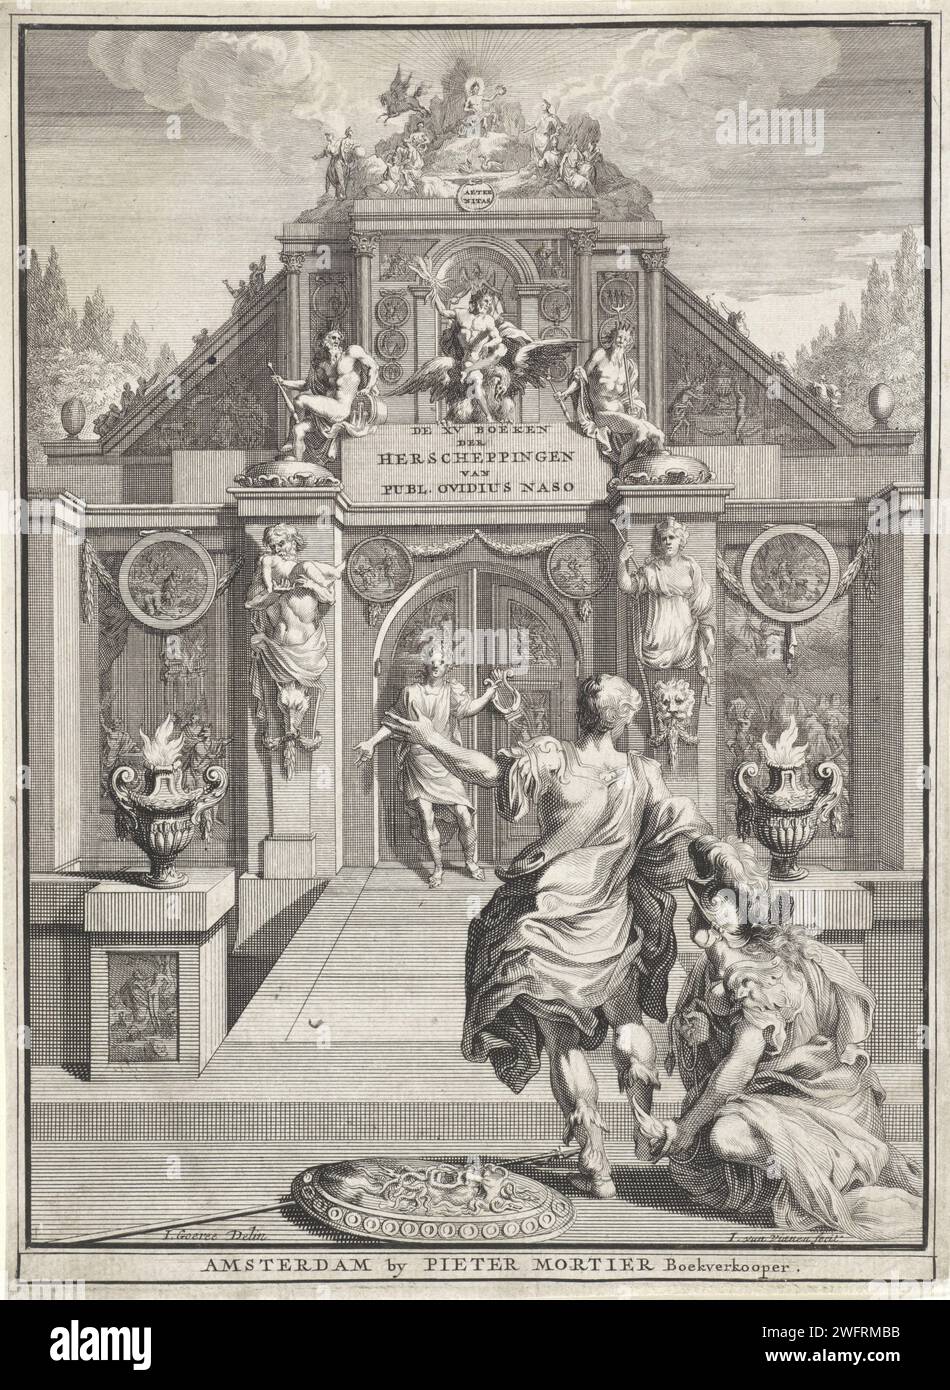 Minerva and Apollo accompany Ovidius to a temple, Jan van Vianen, after Jan Goeree, 1697 print Minerva removes Ovidius from his winged shoes. Her shield lies on the floor. At a temple is Apollo that keeps the door of the temple open. On both sides are Hermen of the Kronos and Rheia gods. On top of the Temple Apollo, Pegasus and the Muses on Mount Helicon. Amsterdam paper etching / engraving (story of) Ovid. Aegis: shield with Gorgon's head (attribute of Minerva). (story of) Minerva (Pallas, Athena). (story of) Apollo (Phoebus). Helicon, sacred to the Muses Stock Photo